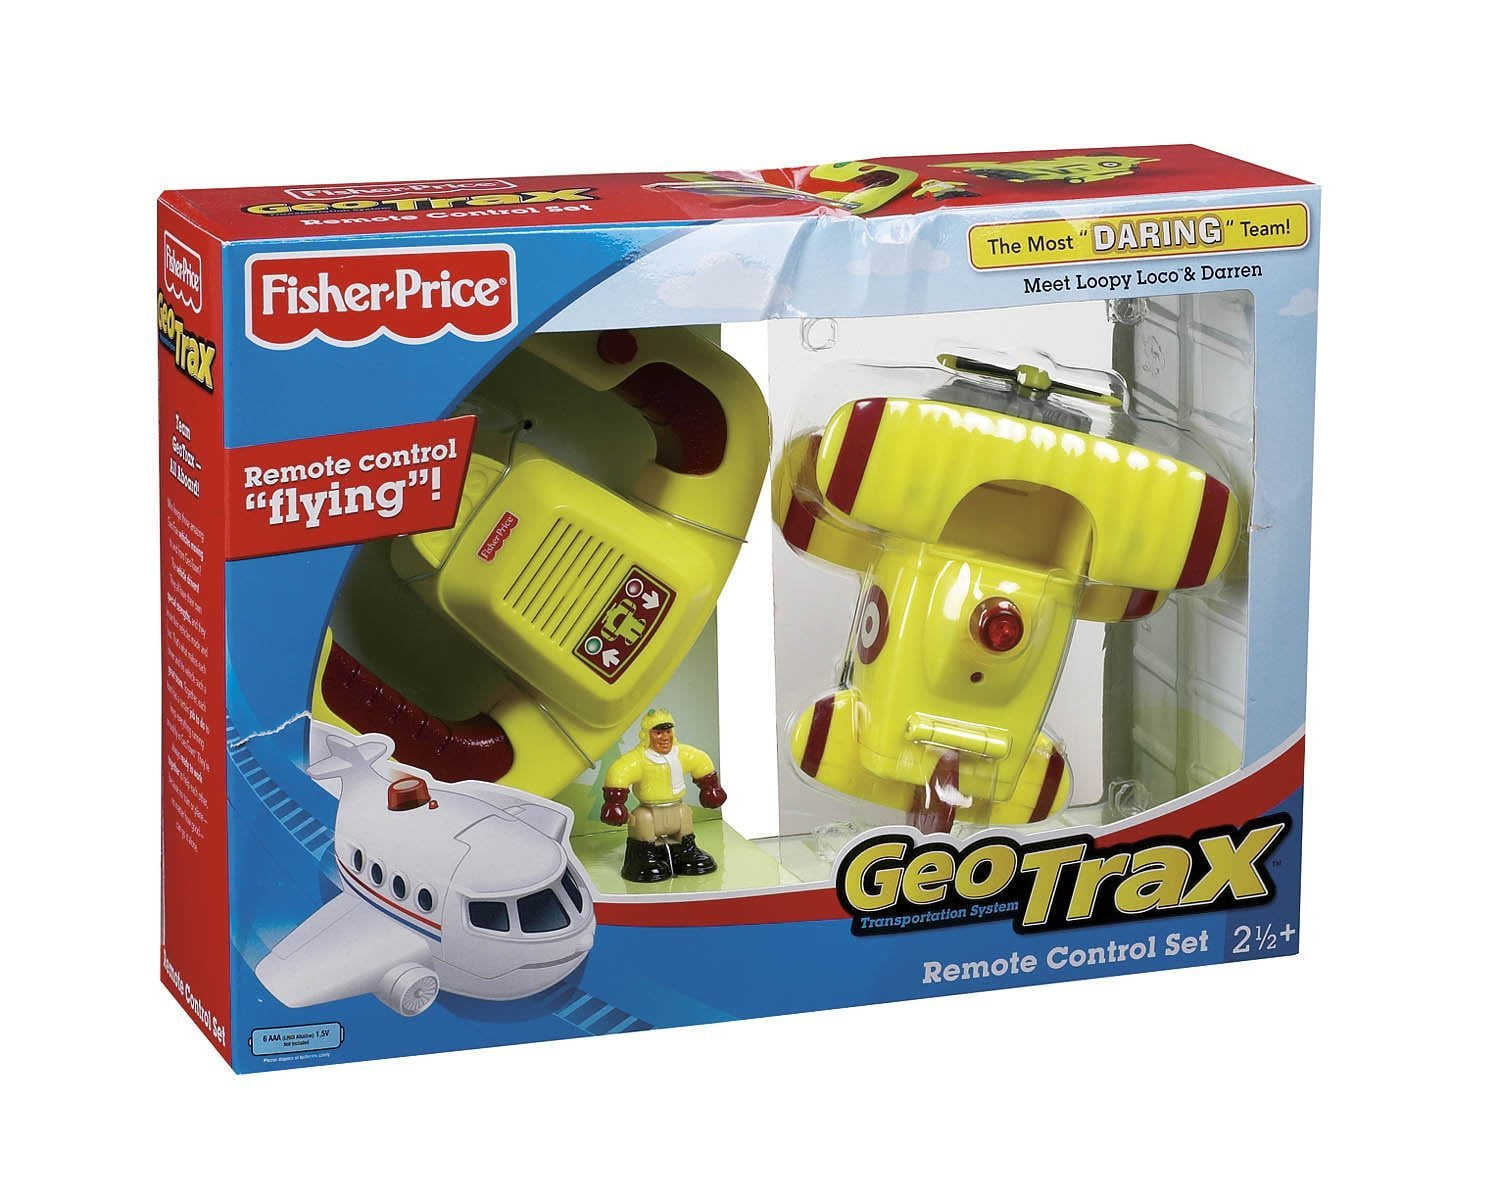 Replacement Geotrax Fisher Price REMOTE CONTROL Unit Your Choice 